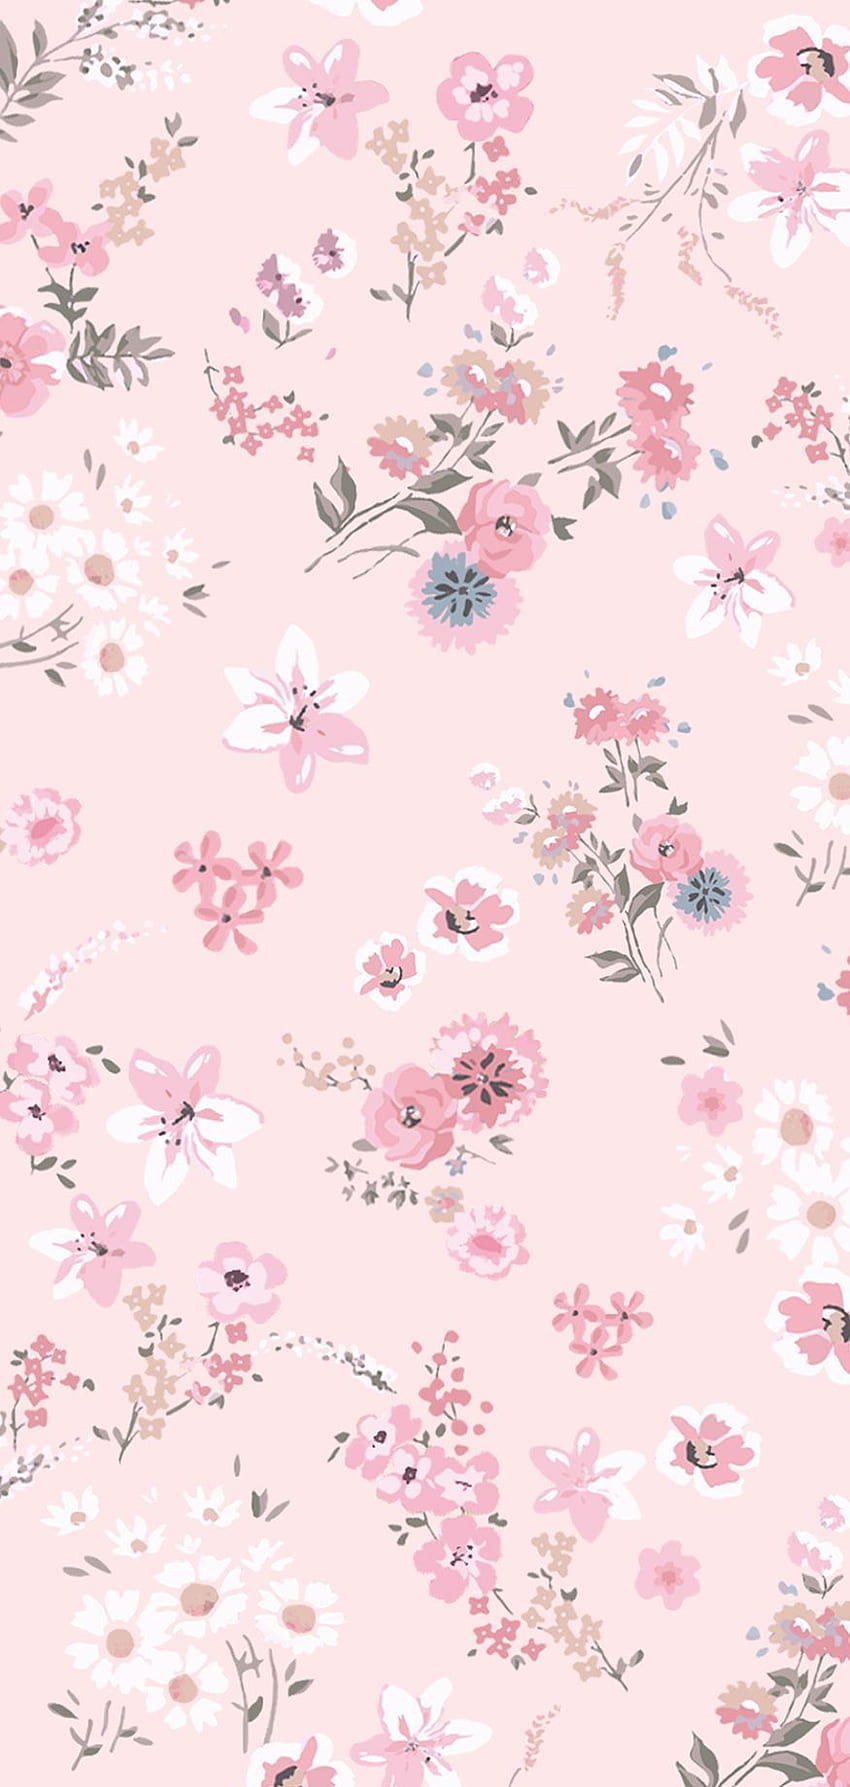 iPhone and Android Wallpapers Beautiful Pastel Flower Wallpaper for iPhone  and  Papeis de parede para iphone Papel de parede cor de rosa Papel de  parede floral